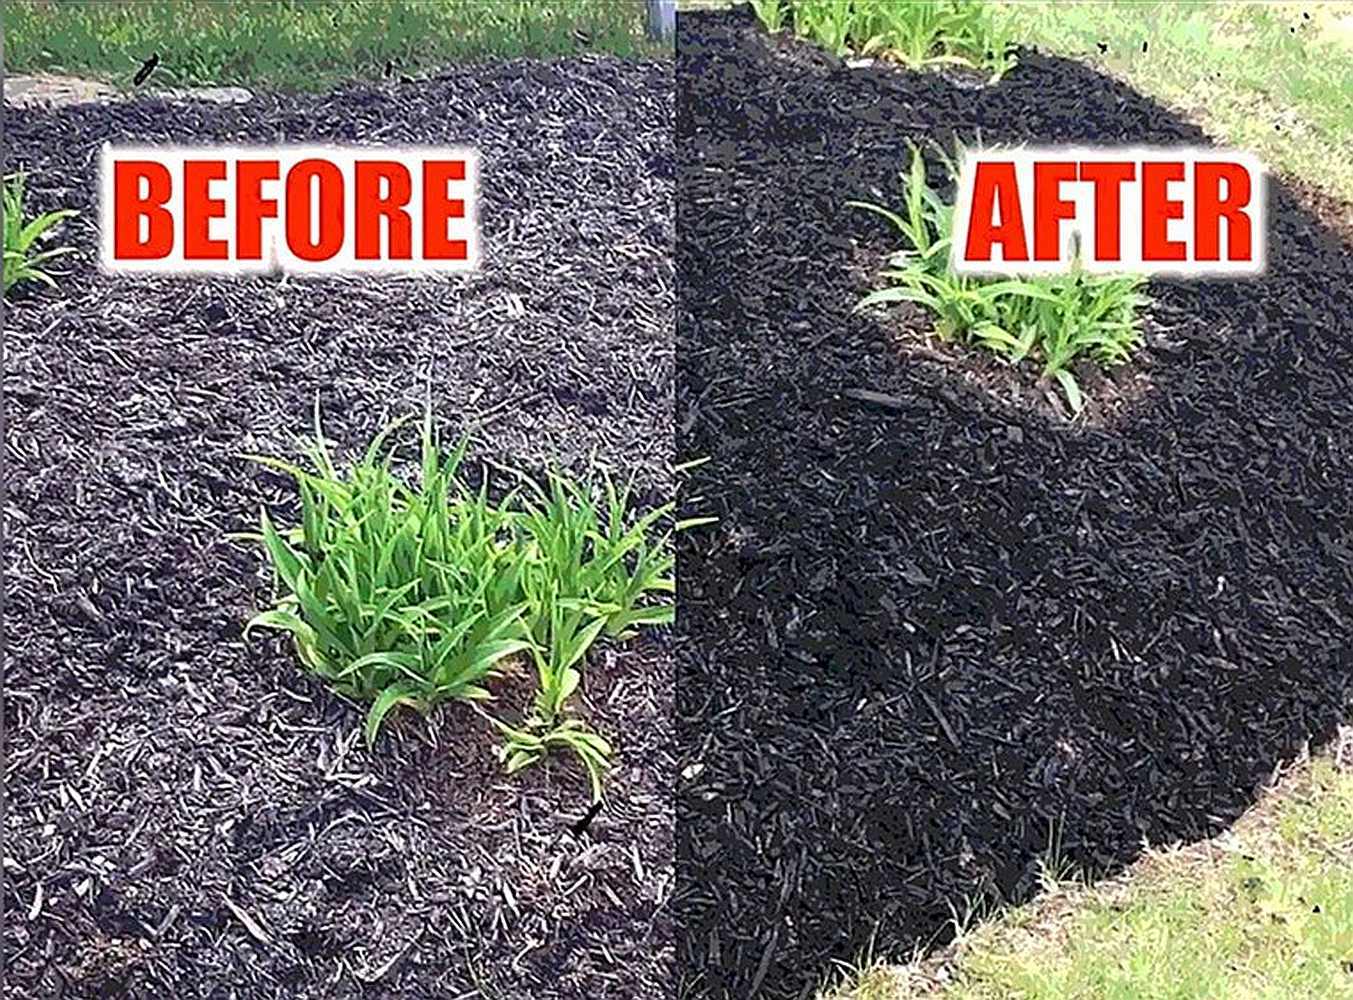 The black mulch dye from @petramax is amazing! I highly recommend